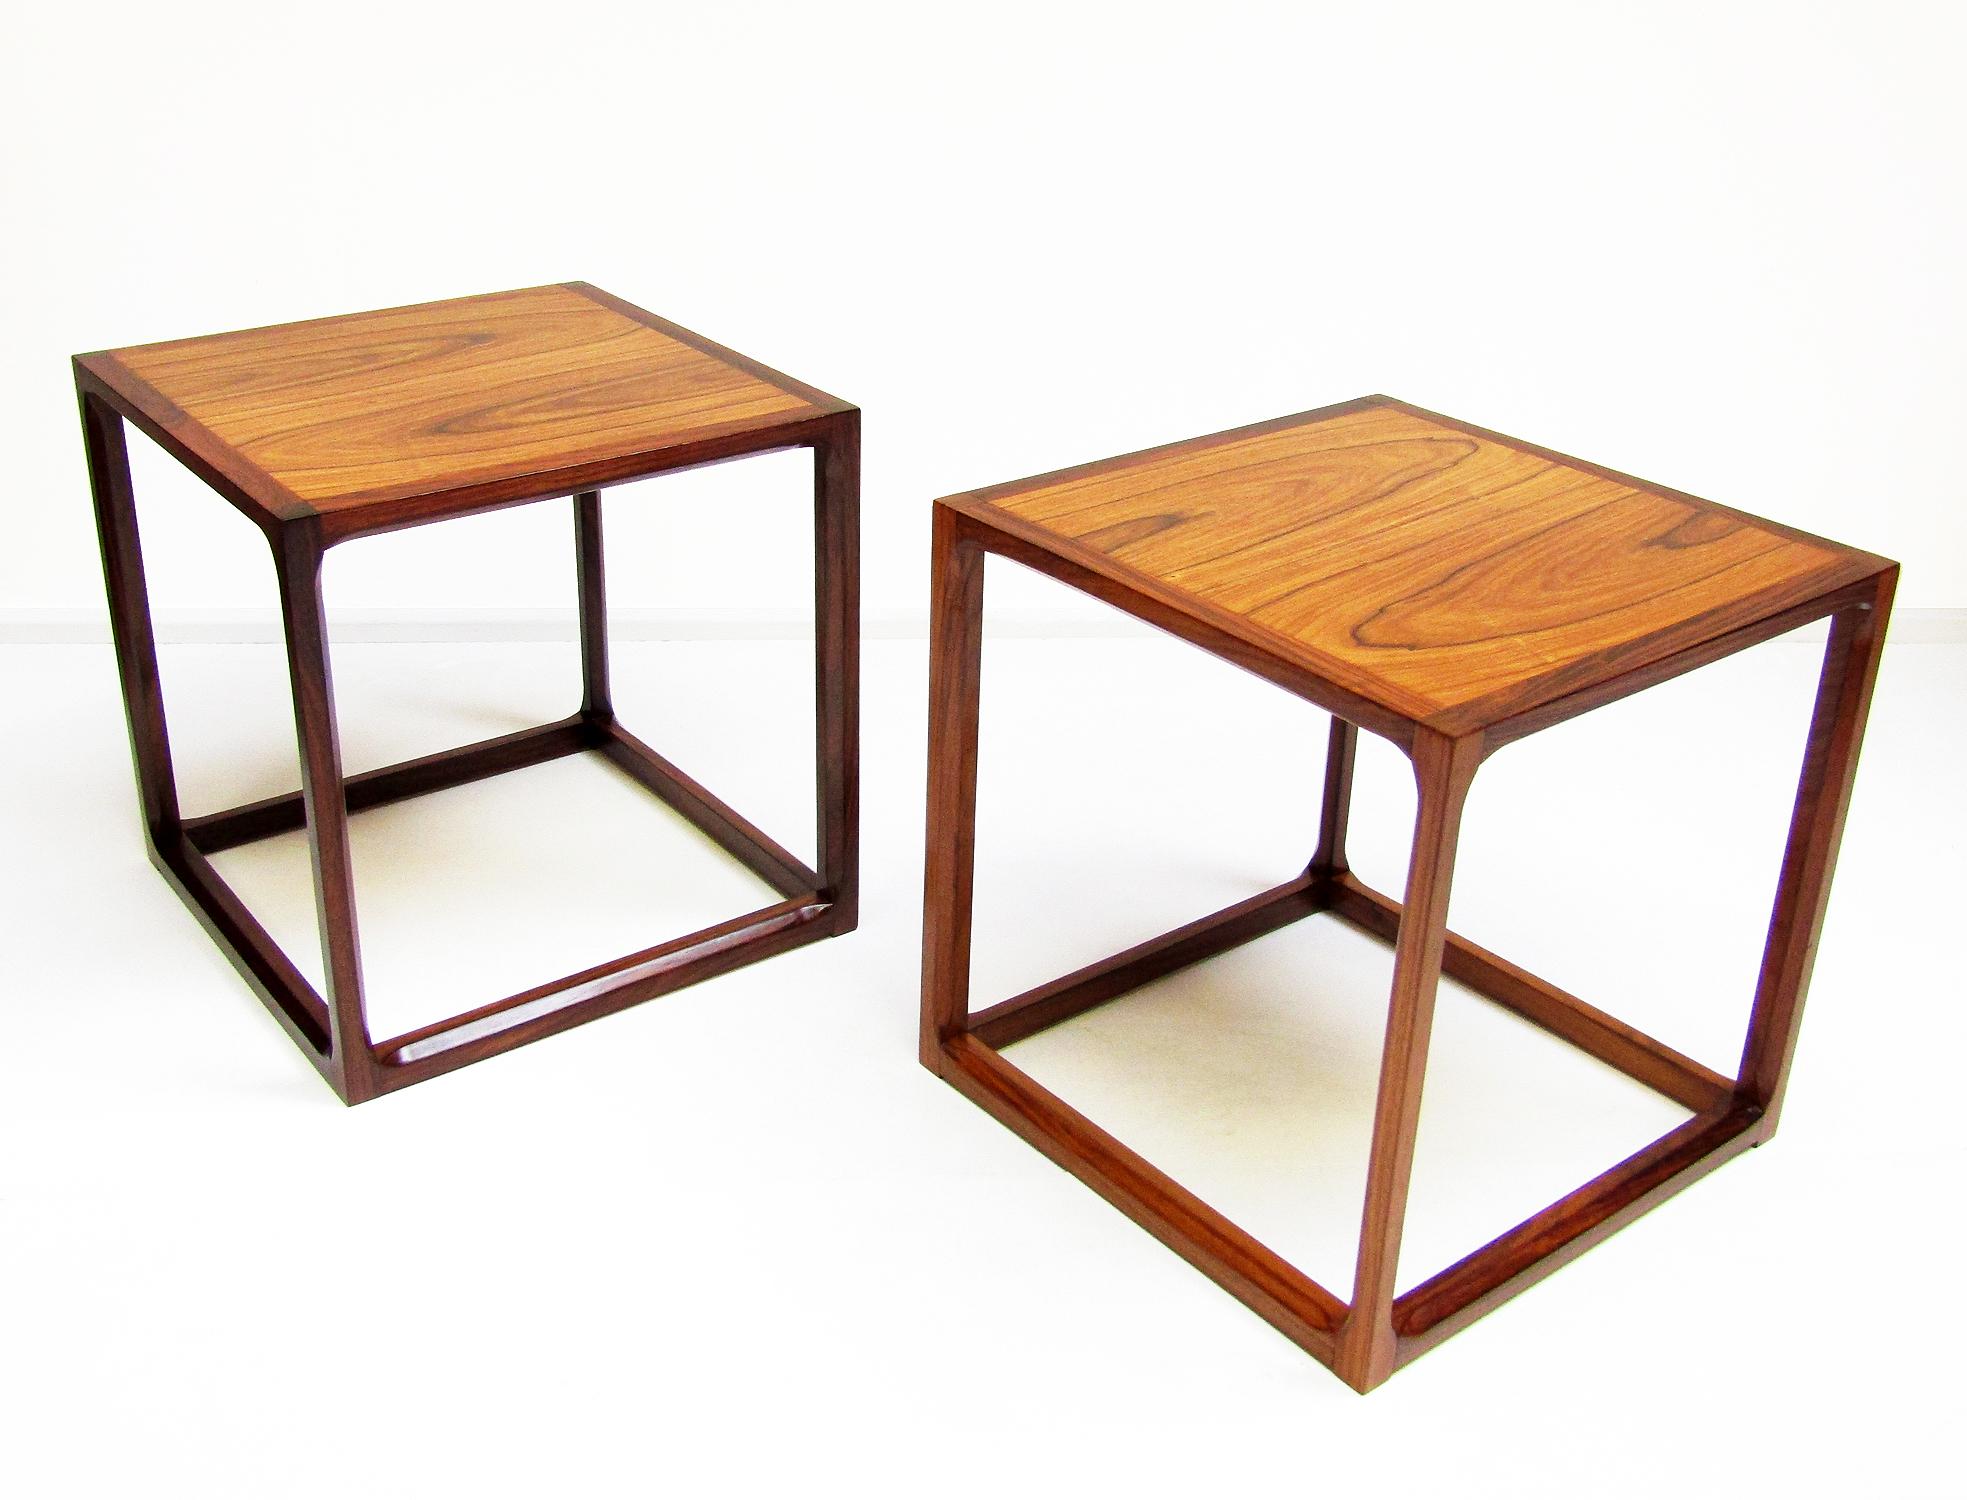 Hardwood Pair of Danish Rosewood 1960s Cube Lamp Tables / Nightstands by Kai Kristiansen For Sale